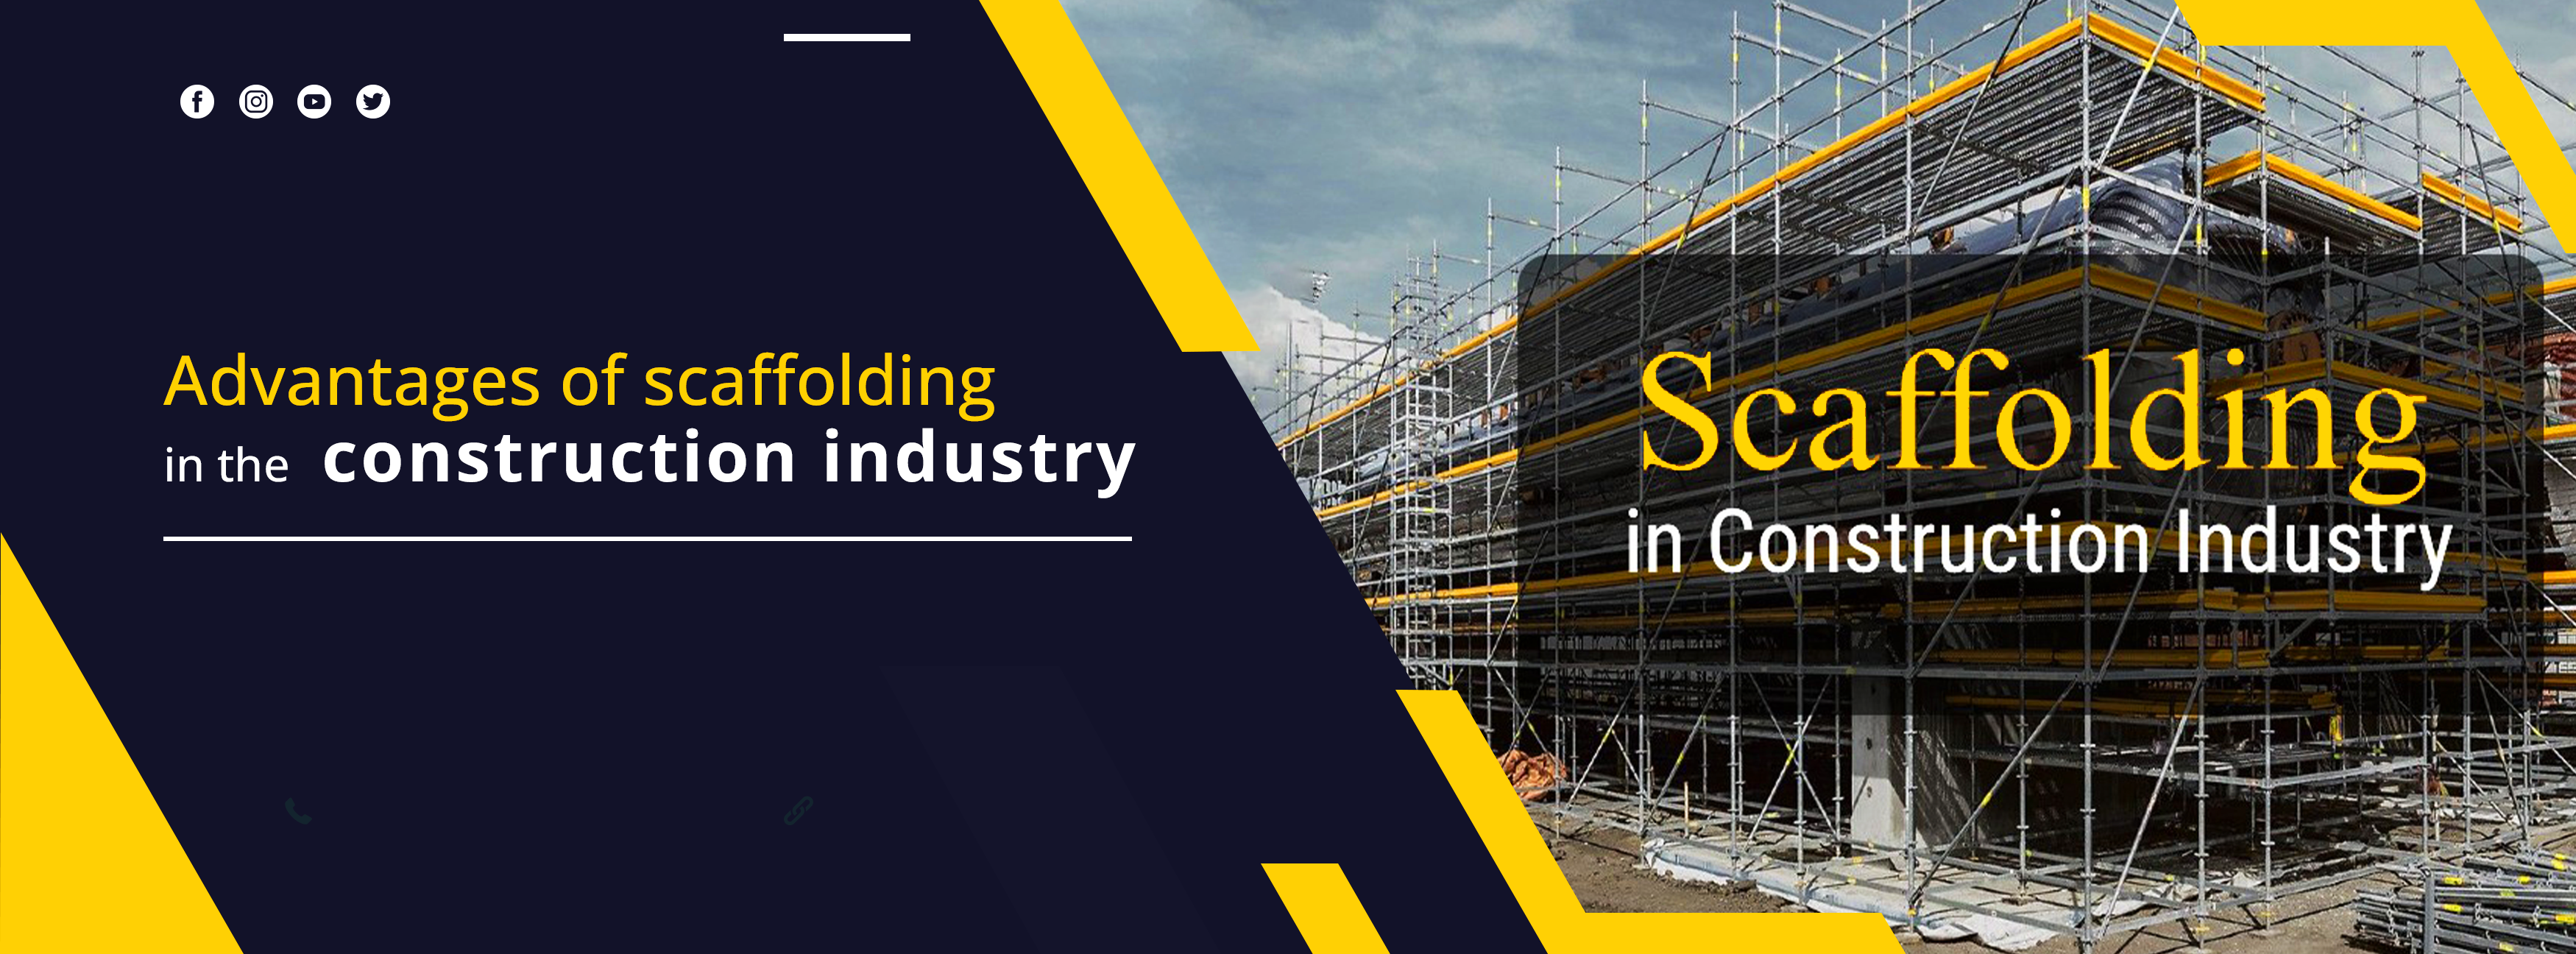 Advantages-of-scaffolding-in-the-construction-industry-banner-design